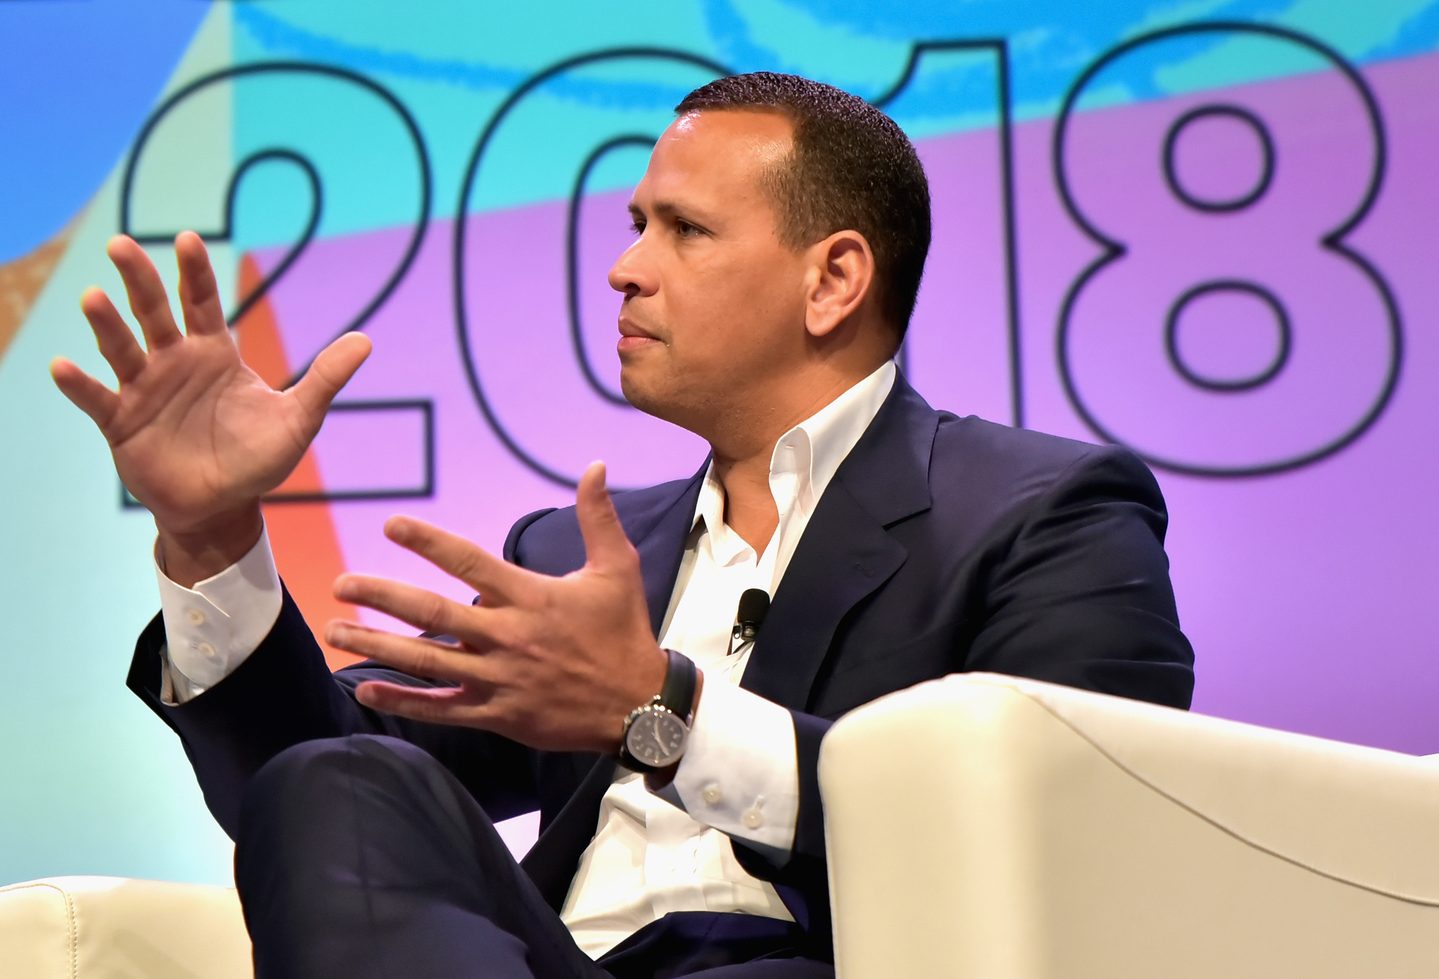 Former baseball star Alex Rodriguez was interviewed during “Alex Rodriguez: Baseball, Business & Redemption w/CNBC.” Photo by Chris Saucedo/Getty Images for SXSW